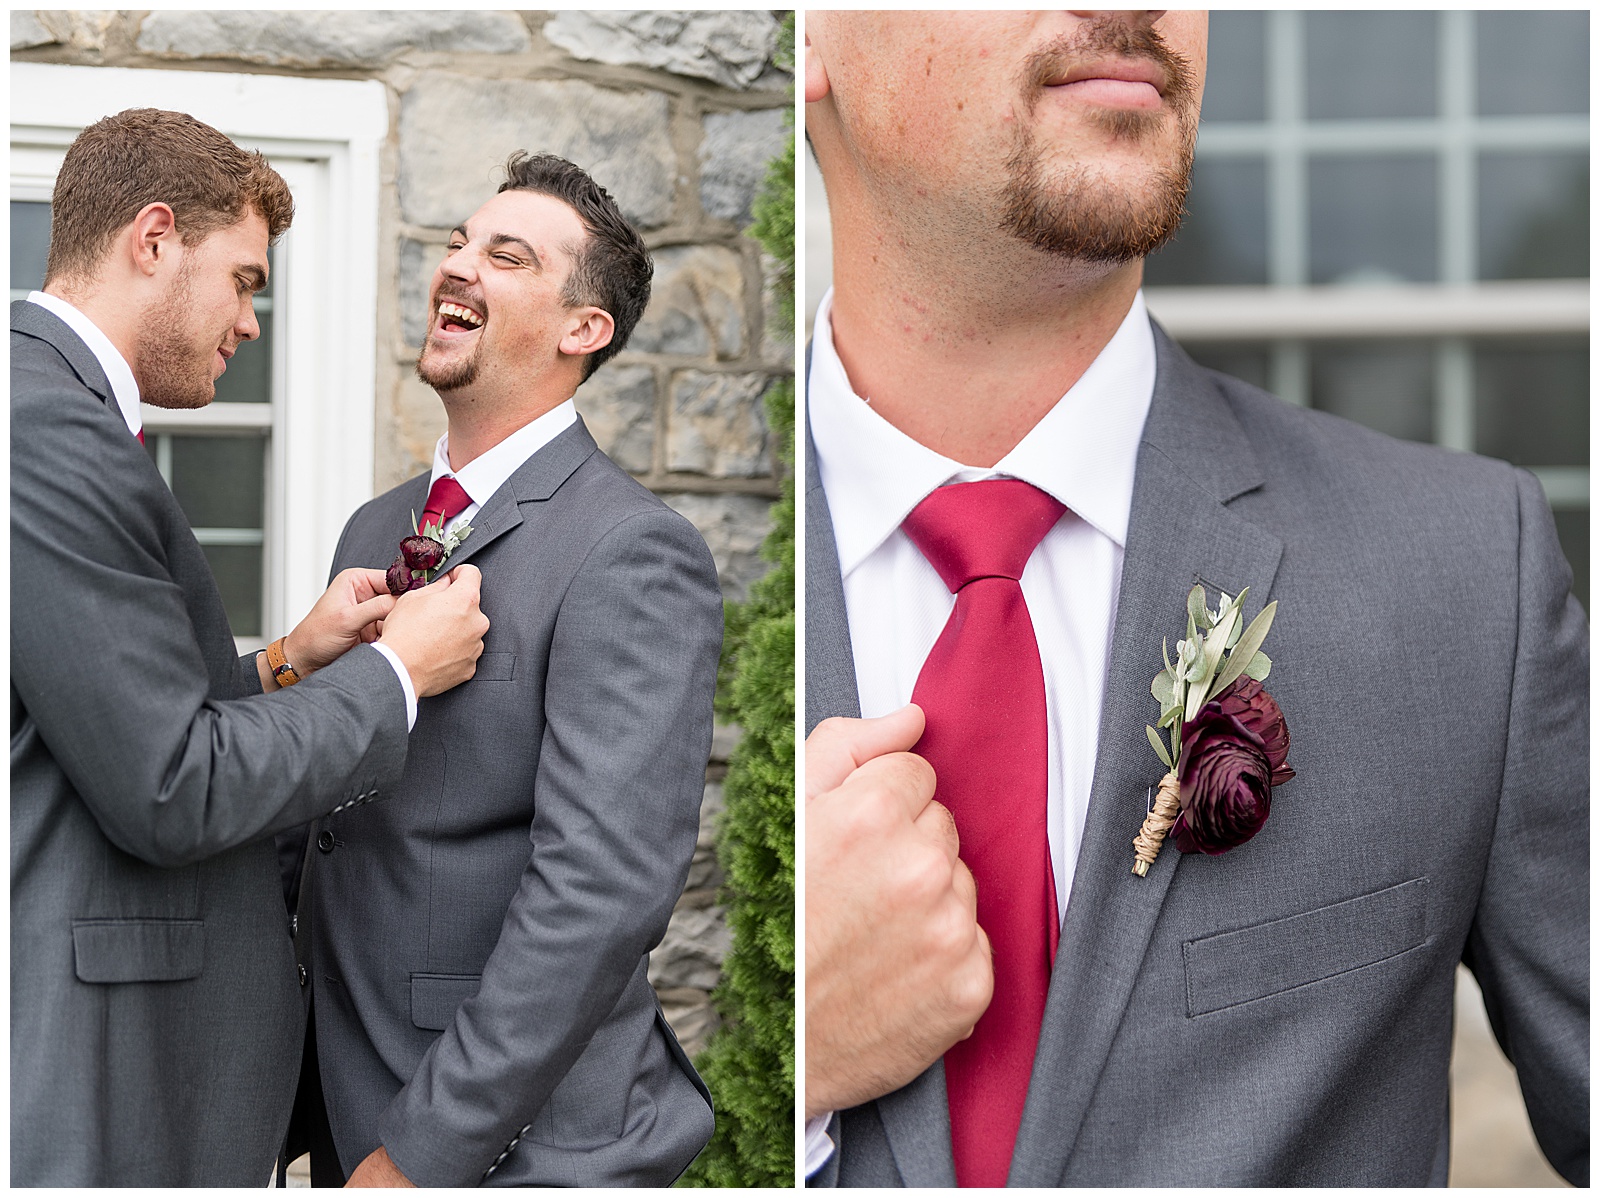 groom getting help with his boutonniere from his best man as they both smile